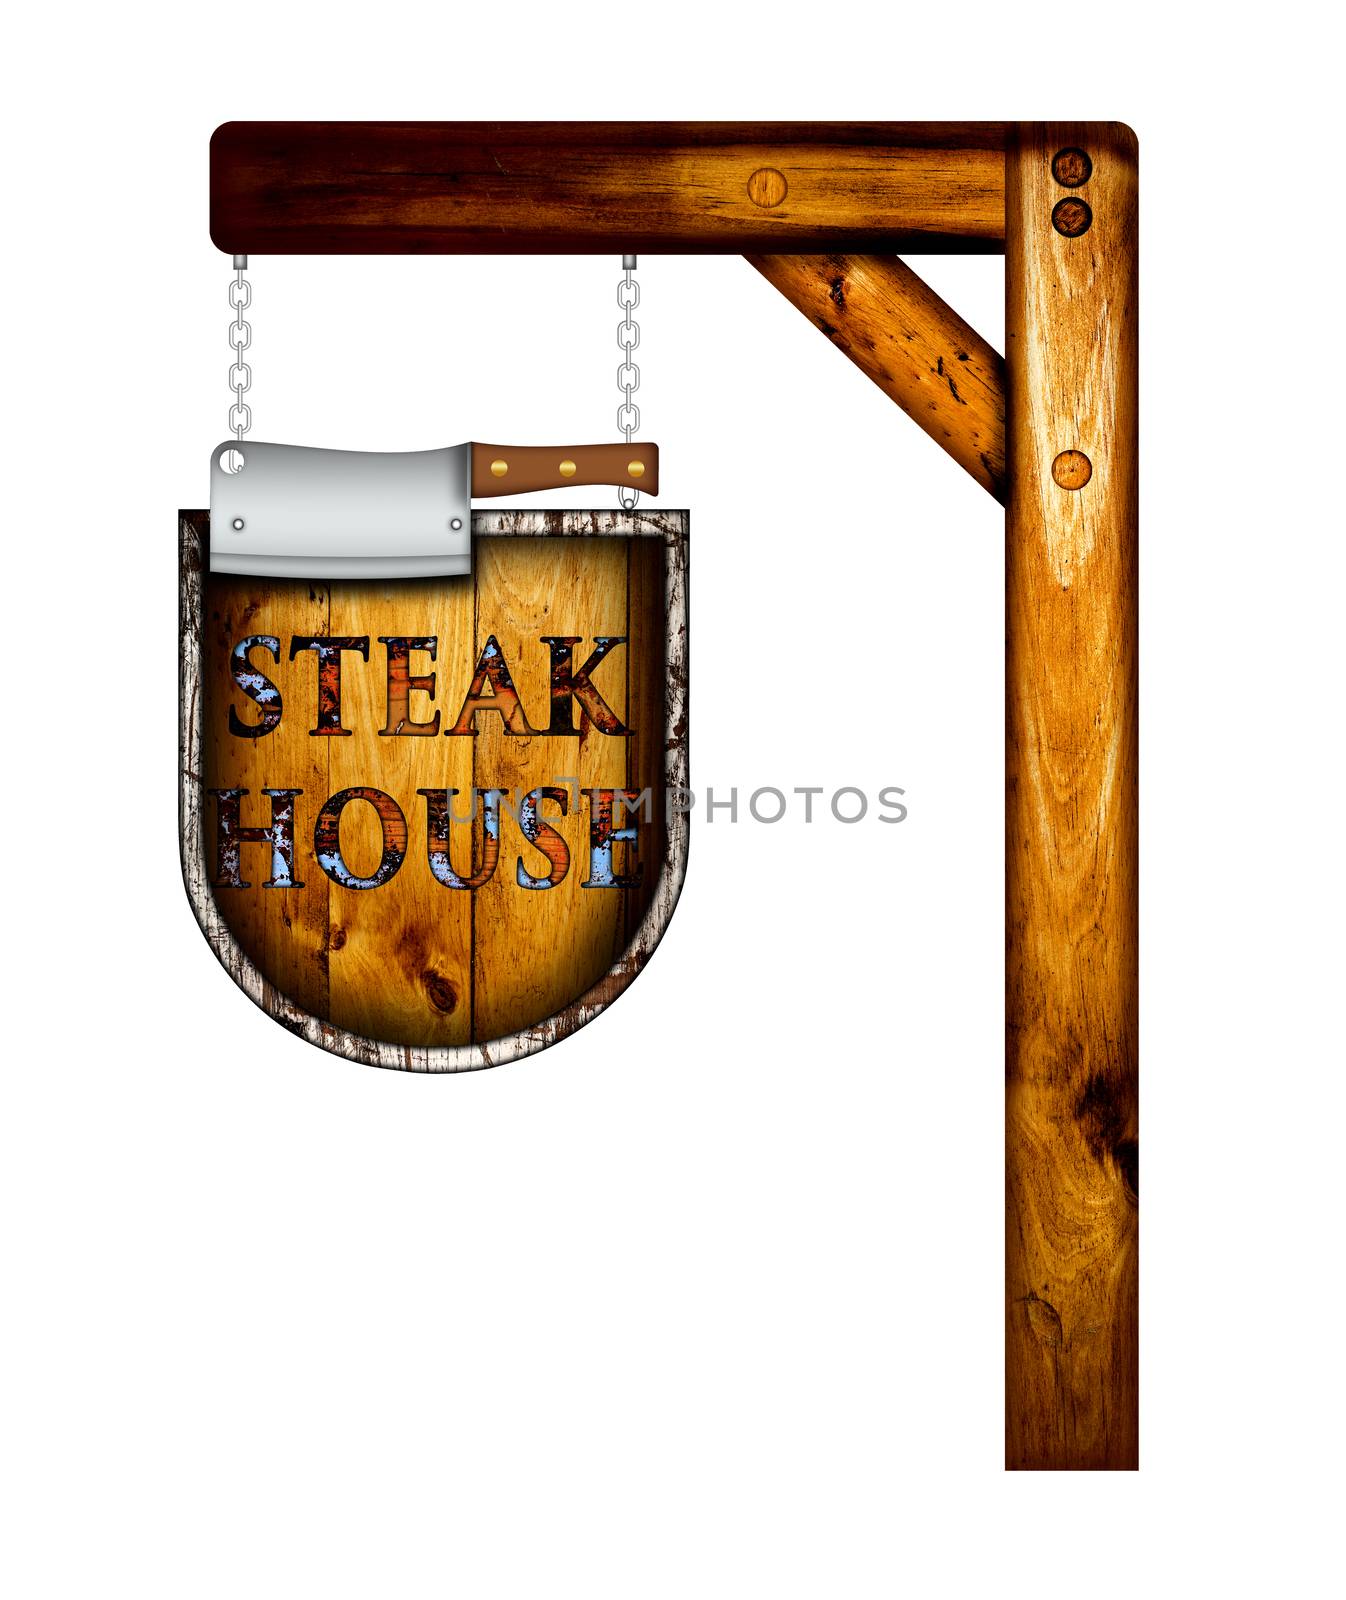 Steak house sign over a white background.